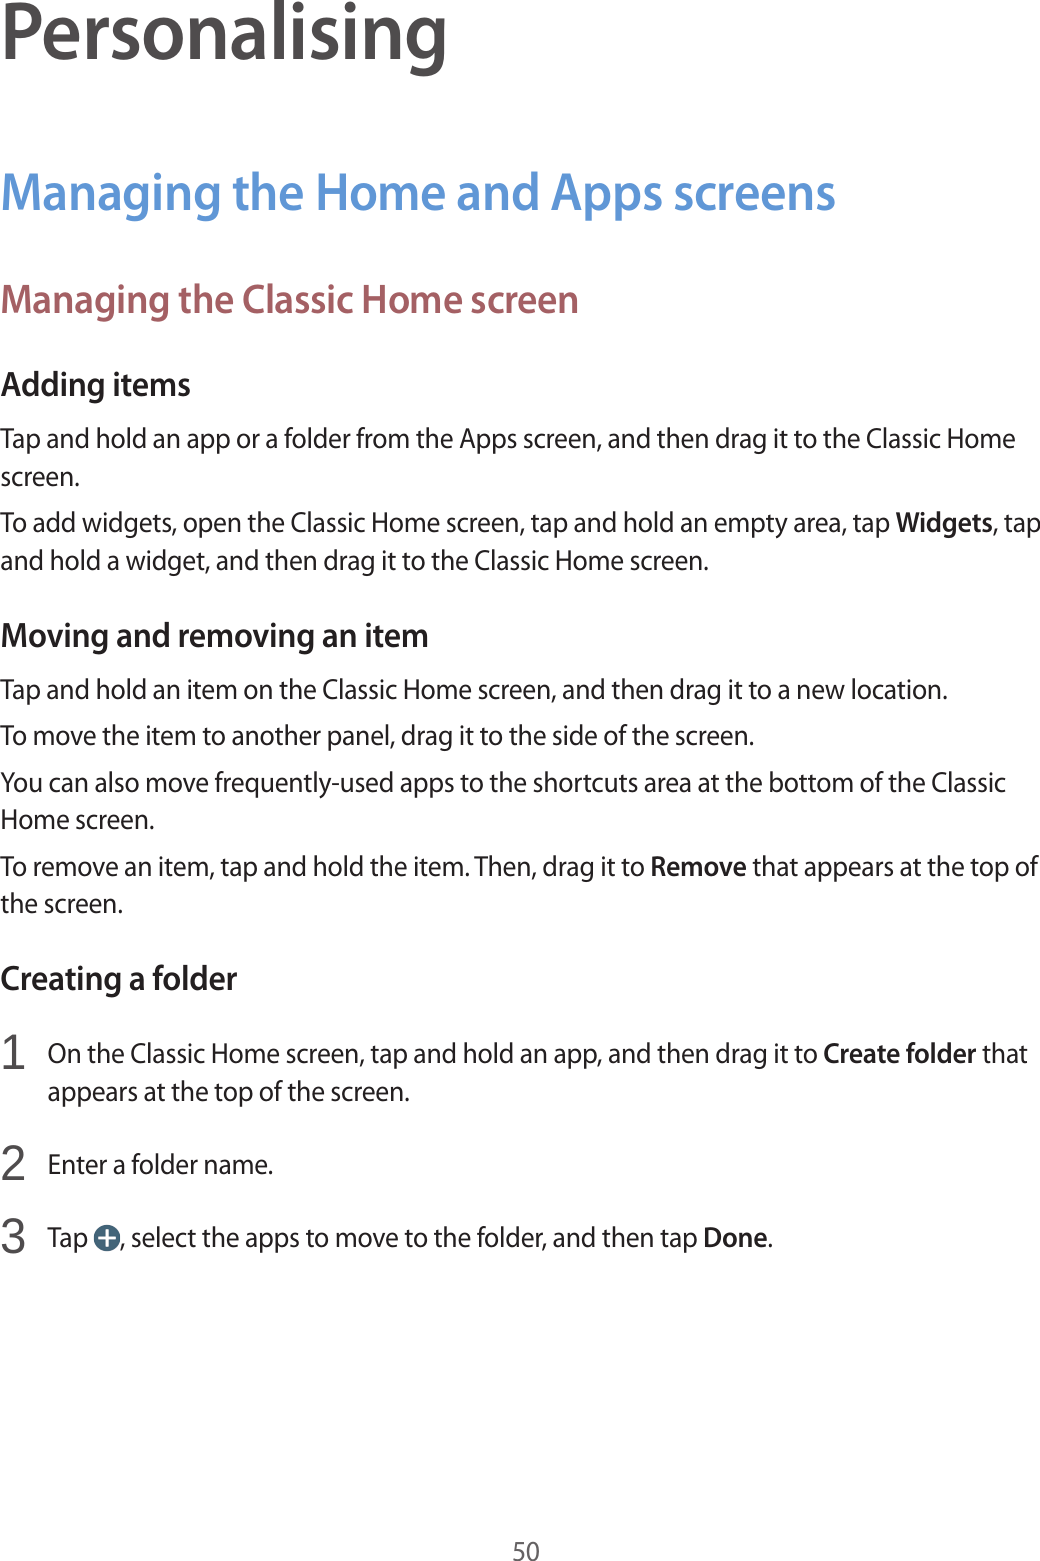 50PersonalisingManaging the Home and Apps screensManaging the Classic Home screenAdding itemsTap and hold an app or a folder from the Apps screen, and then drag it to the Classic Home screen.To add widgets, open the Classic Home screen, tap and hold an empty area, tap Widgets, tap and hold a widget, and then drag it to the Classic Home screen.Moving and removing an itemTap and hold an item on the Classic Home screen, and then drag it to a new location.To move the item to another panel, drag it to the side of the screen.You can also move frequently-used apps to the shortcuts area at the bottom of the Classic Home screen.To remove an item, tap and hold the item. Then, drag it to Remove that appears at the top of the screen.Creating a folder1  On the Classic Home screen, tap and hold an app, and then drag it to Create folder that appears at the top of the screen.2  Enter a folder name.3  Tap  , select the apps to move to the folder, and then tap Done.